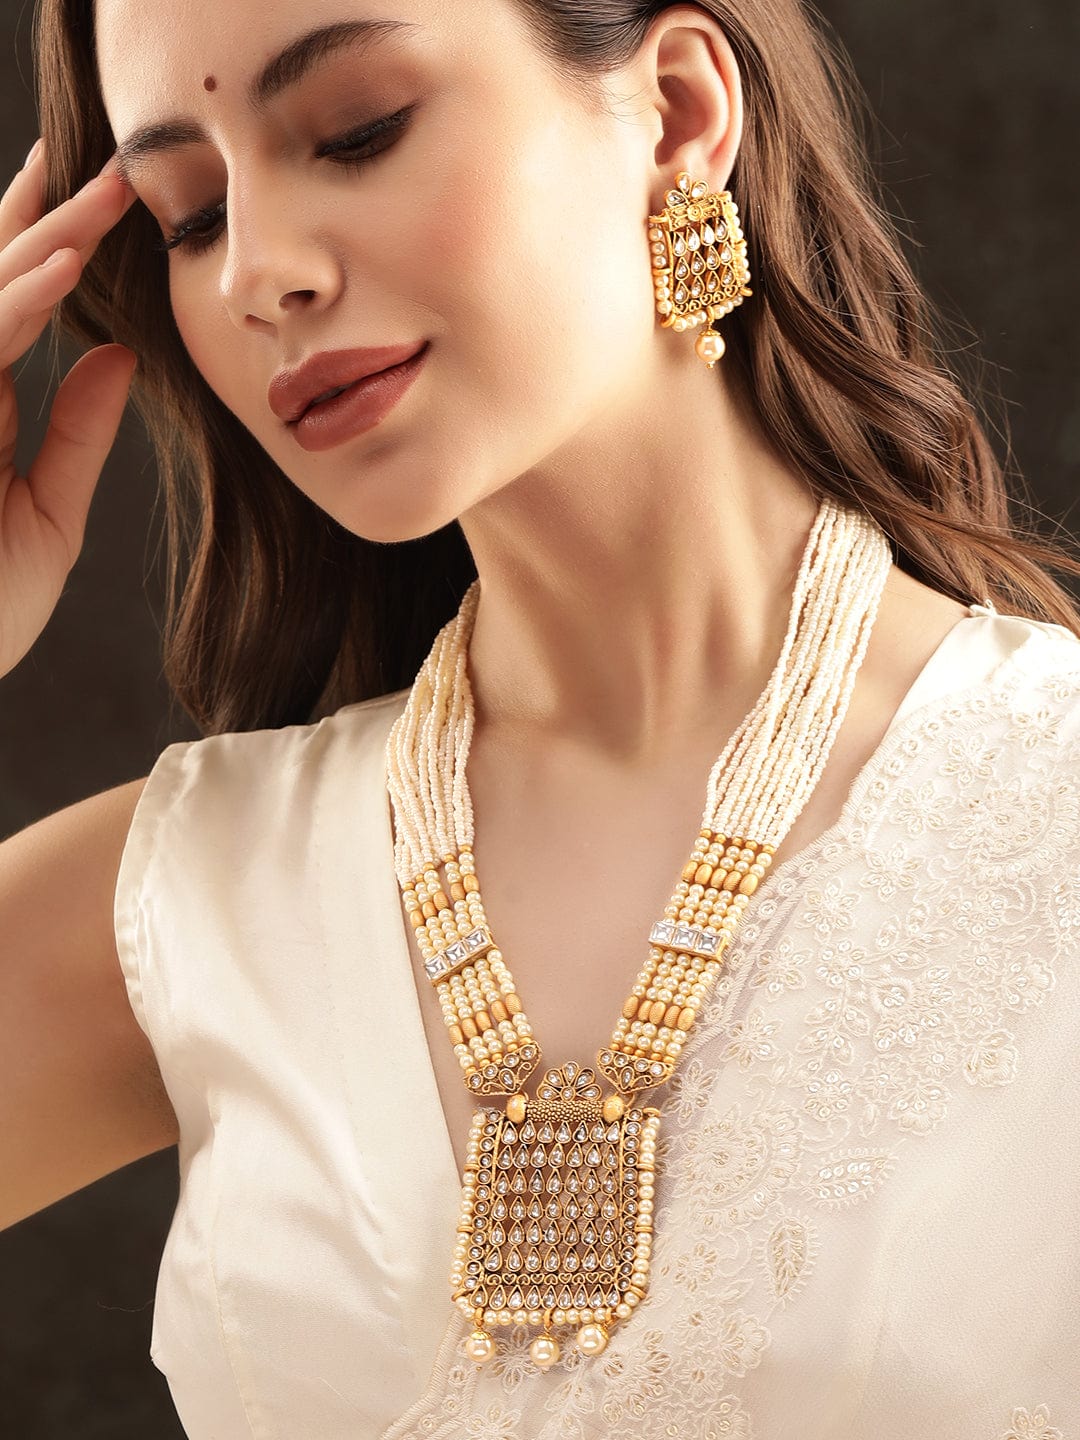 Rubans Gold-Toned Pendant with White Beads Hanging on a Beaded Chain Necklace Set Jewellery Sets